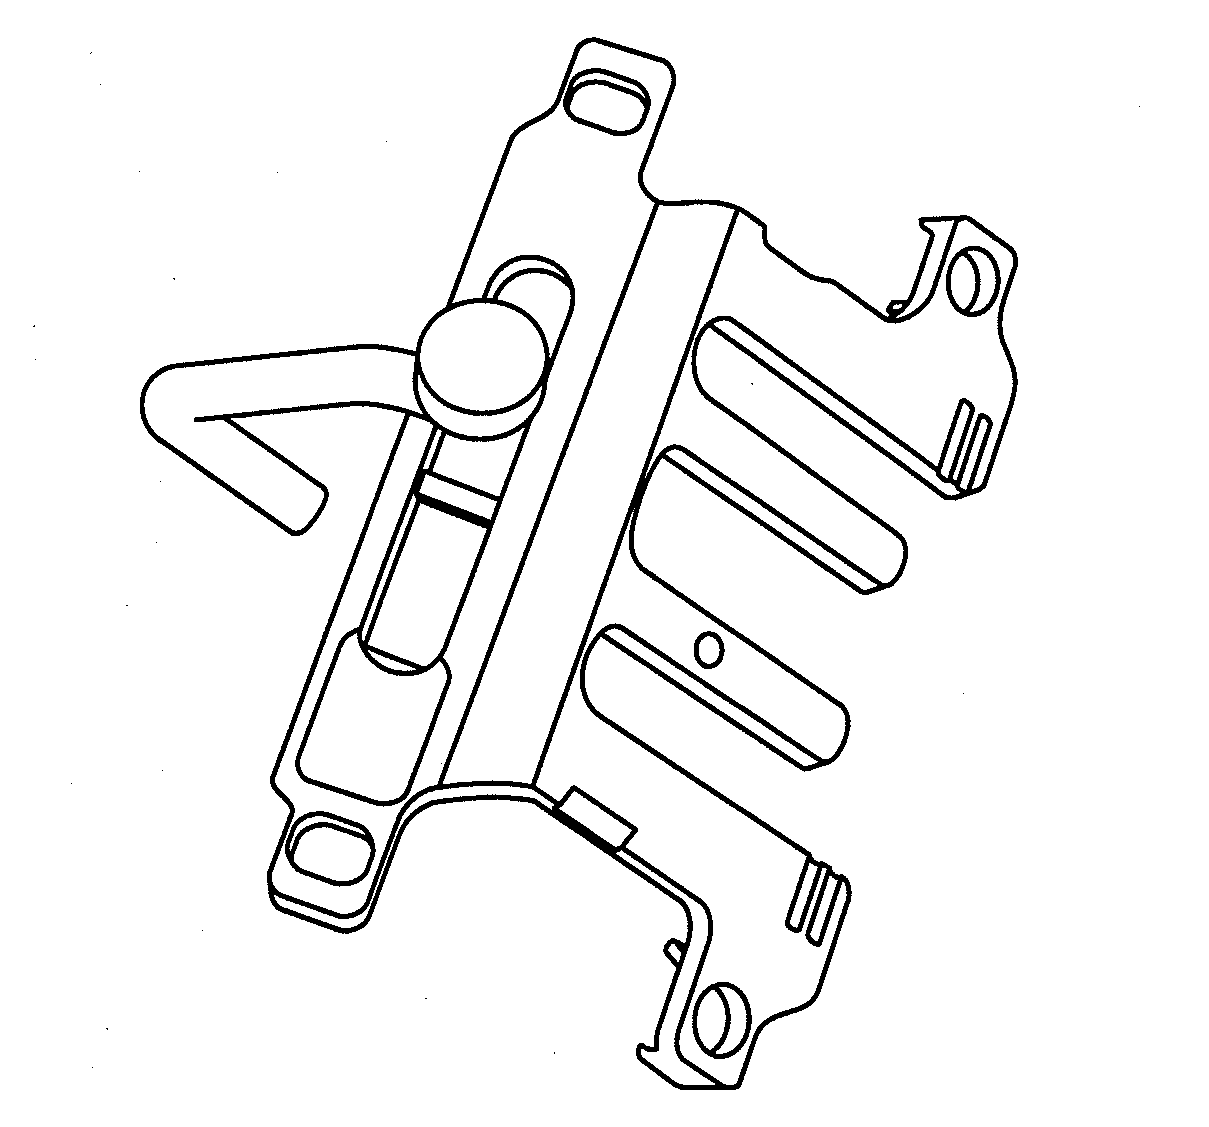 Process for producing tools used in orthopedic surgeries